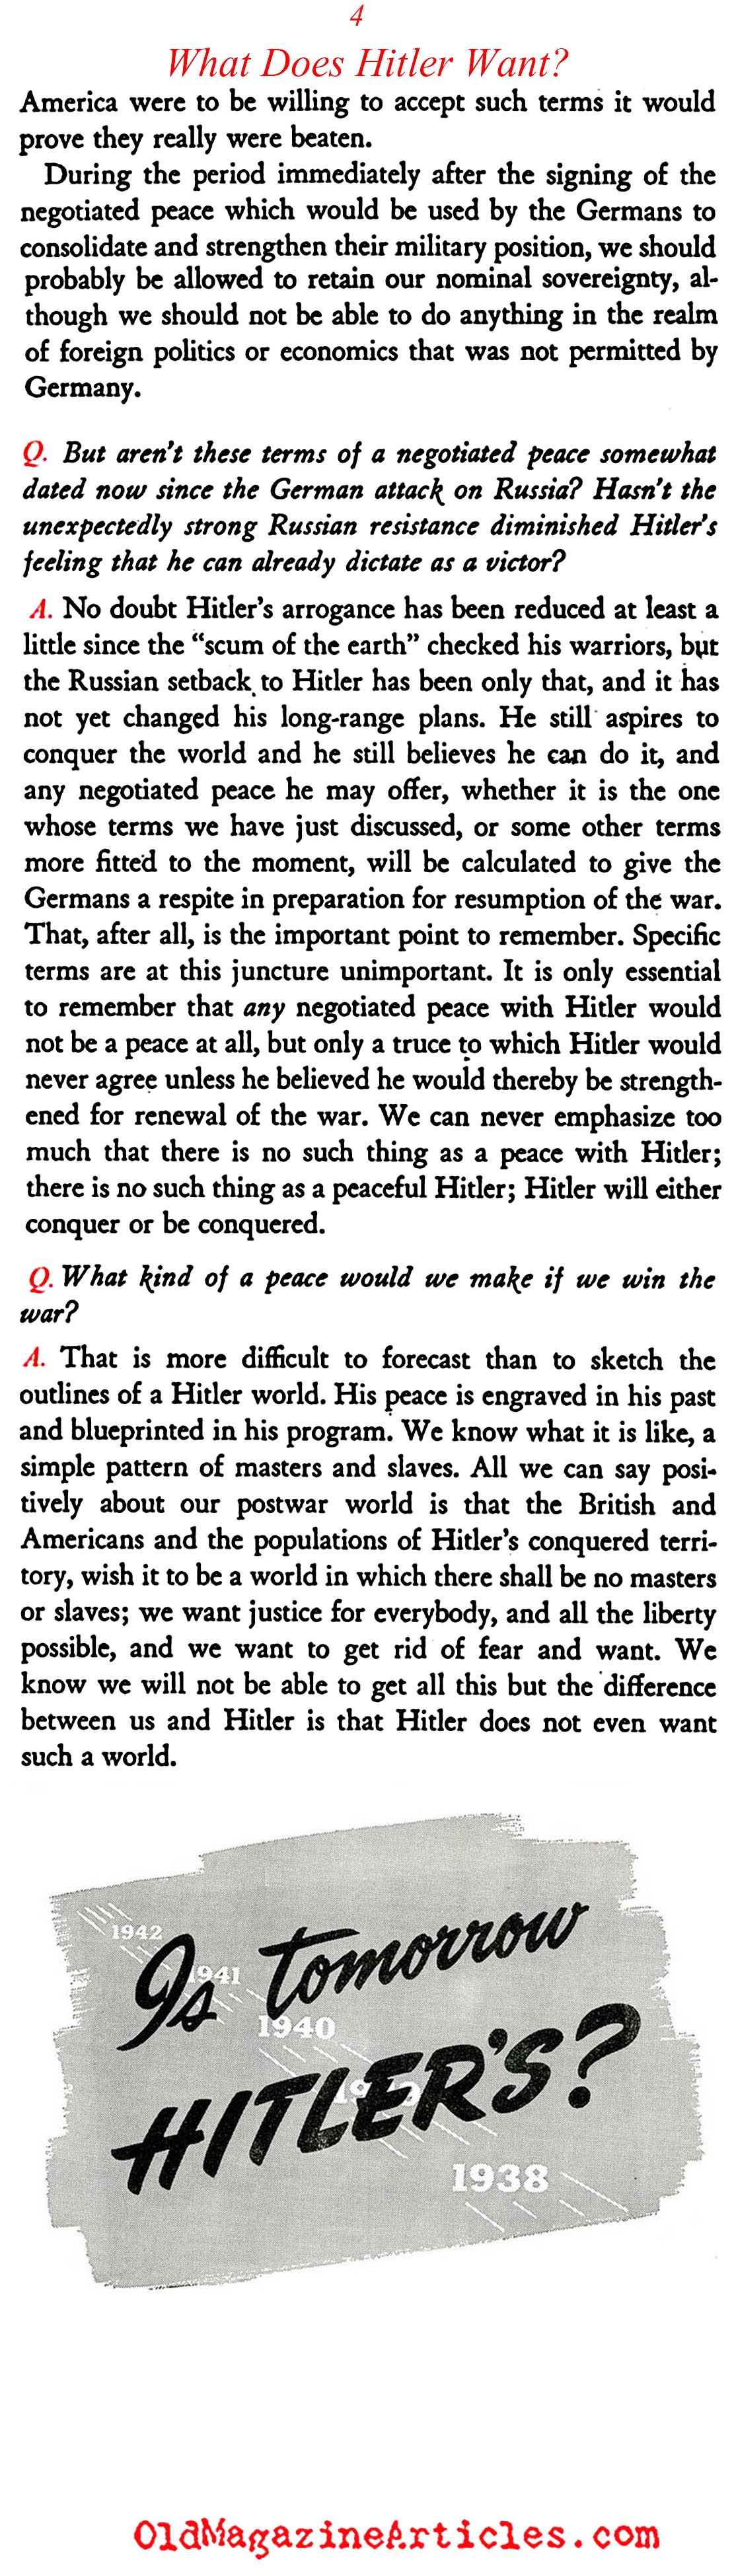 What Hitler Wanted (Omnibooks Magazine, 1942)